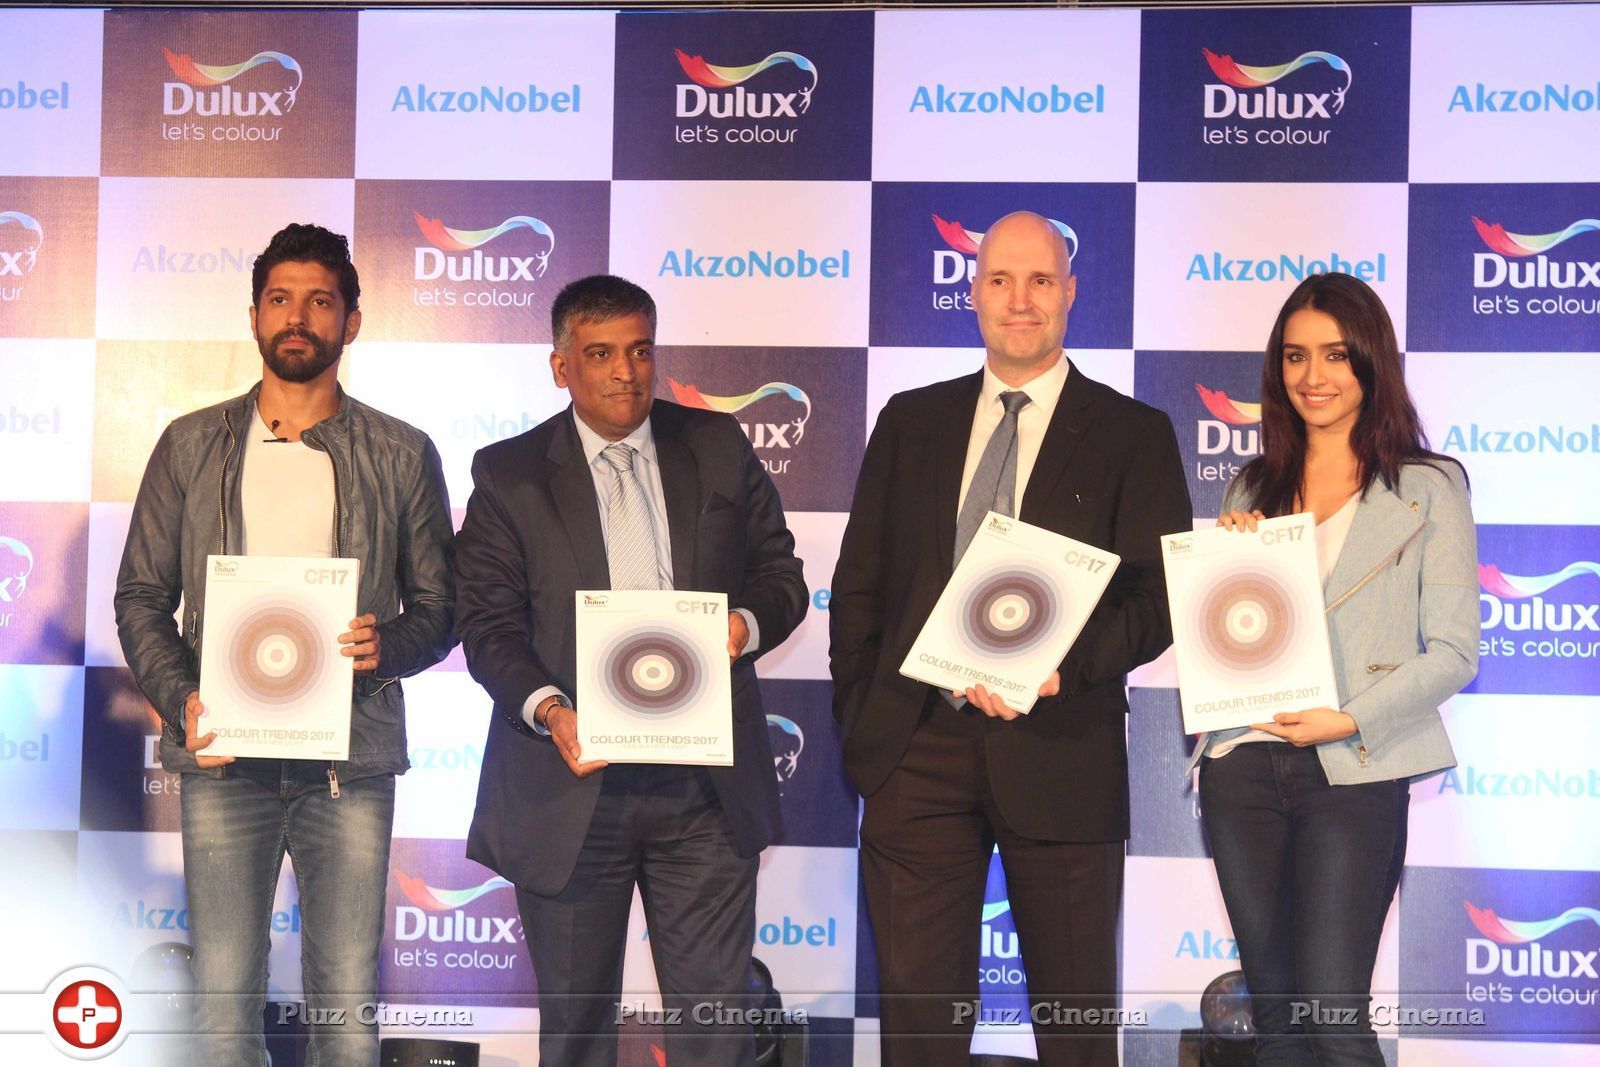 Farhan Akhtar and Shraddha Kapoor at the launch of Dulux new Color Range Photos | Picture 1445950